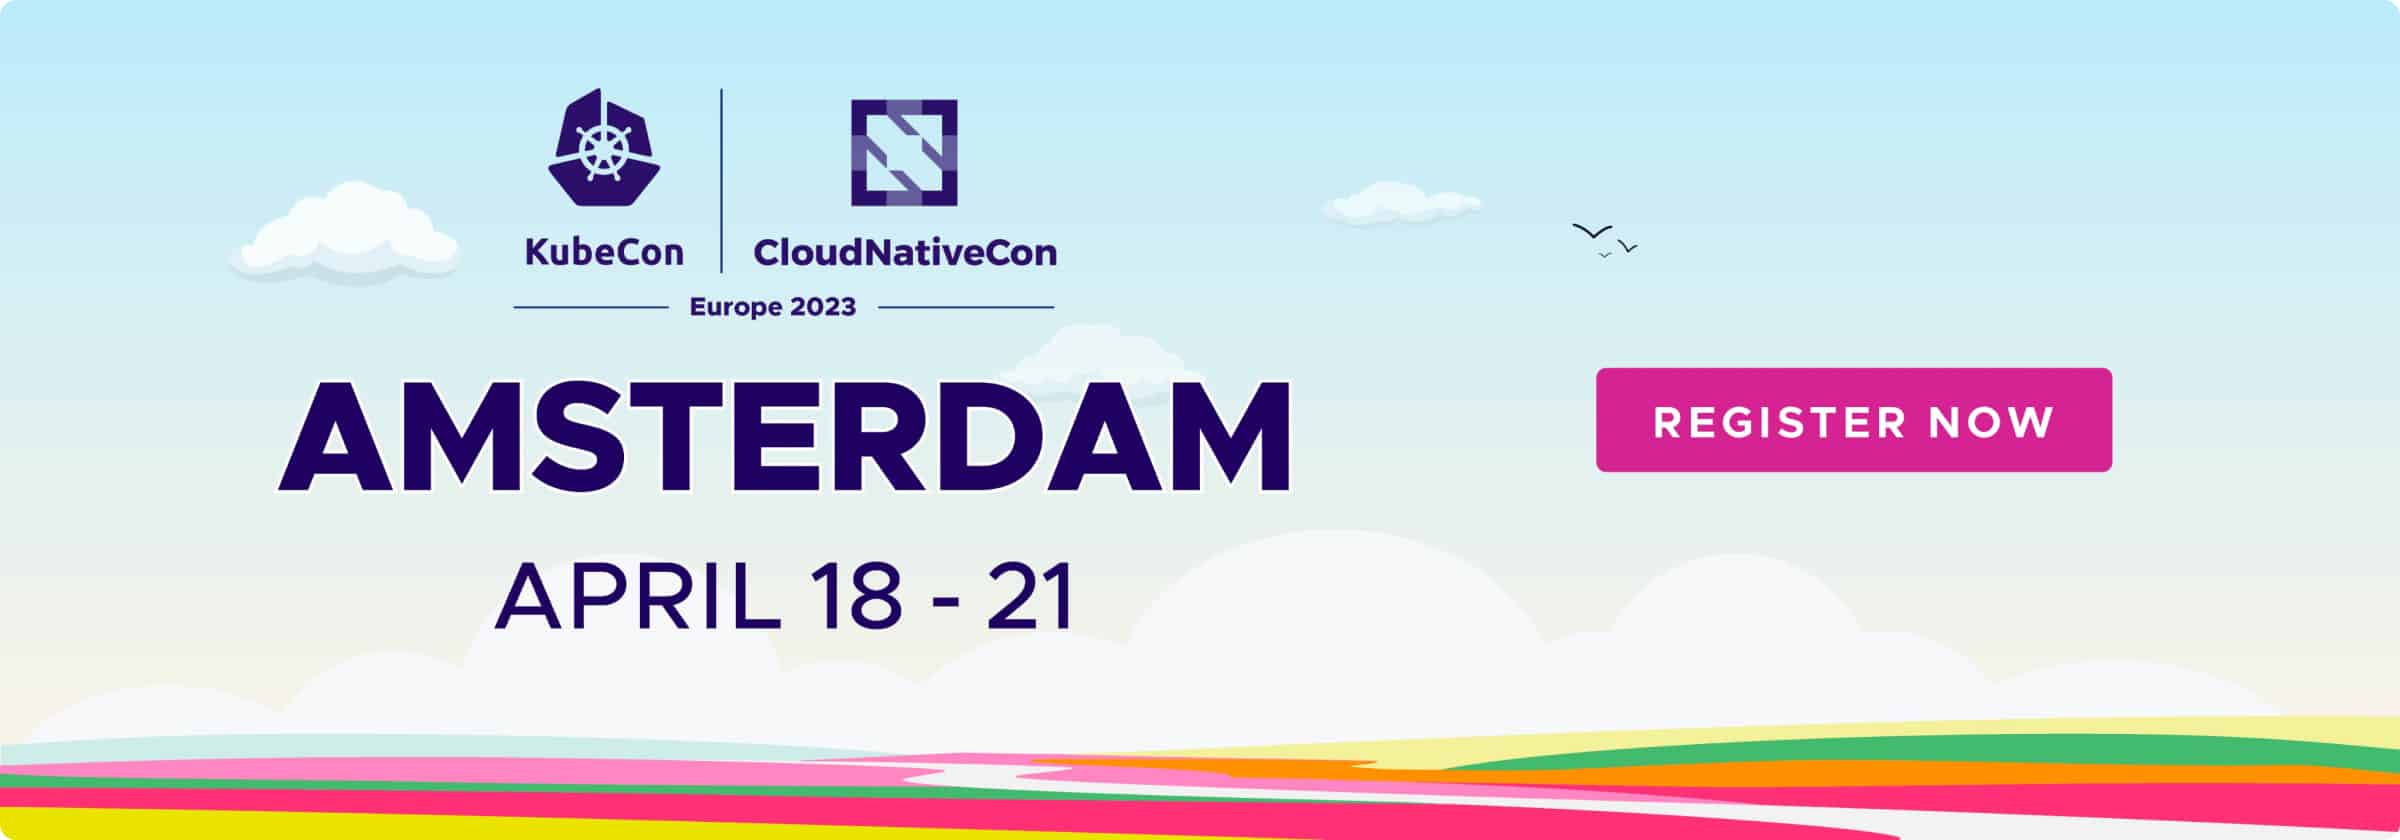 Banner promoting KubeCon + CloudNativeCon Europe 2023